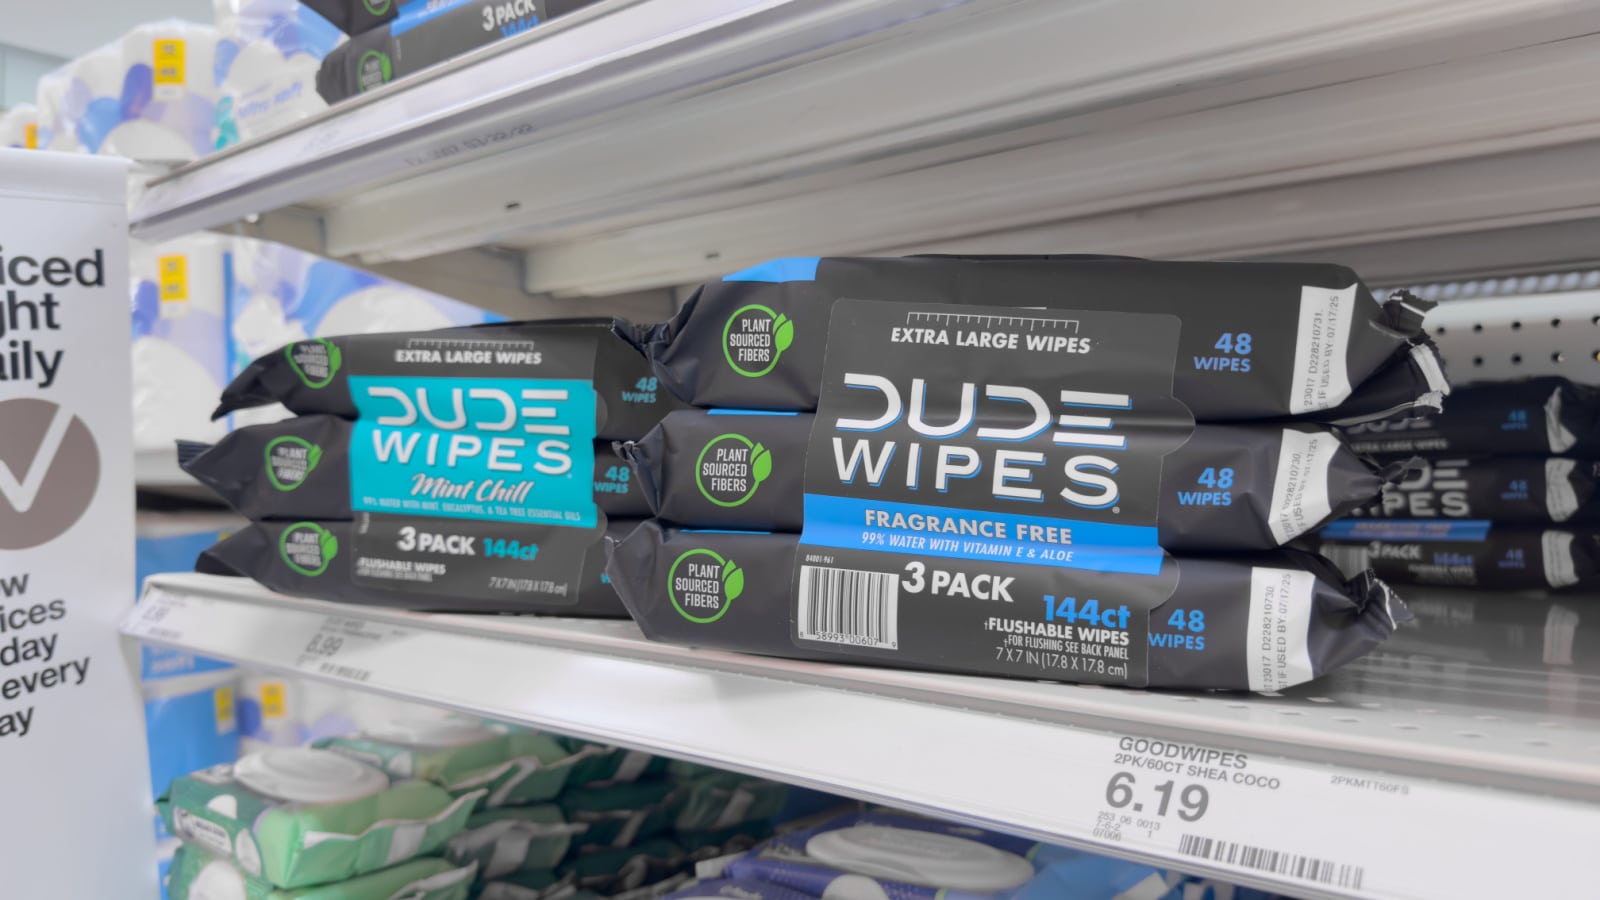 Los Angeles, California, United States - 02-01-2023: A view of several packages of Dude Wipes, on display at a local grocery store.